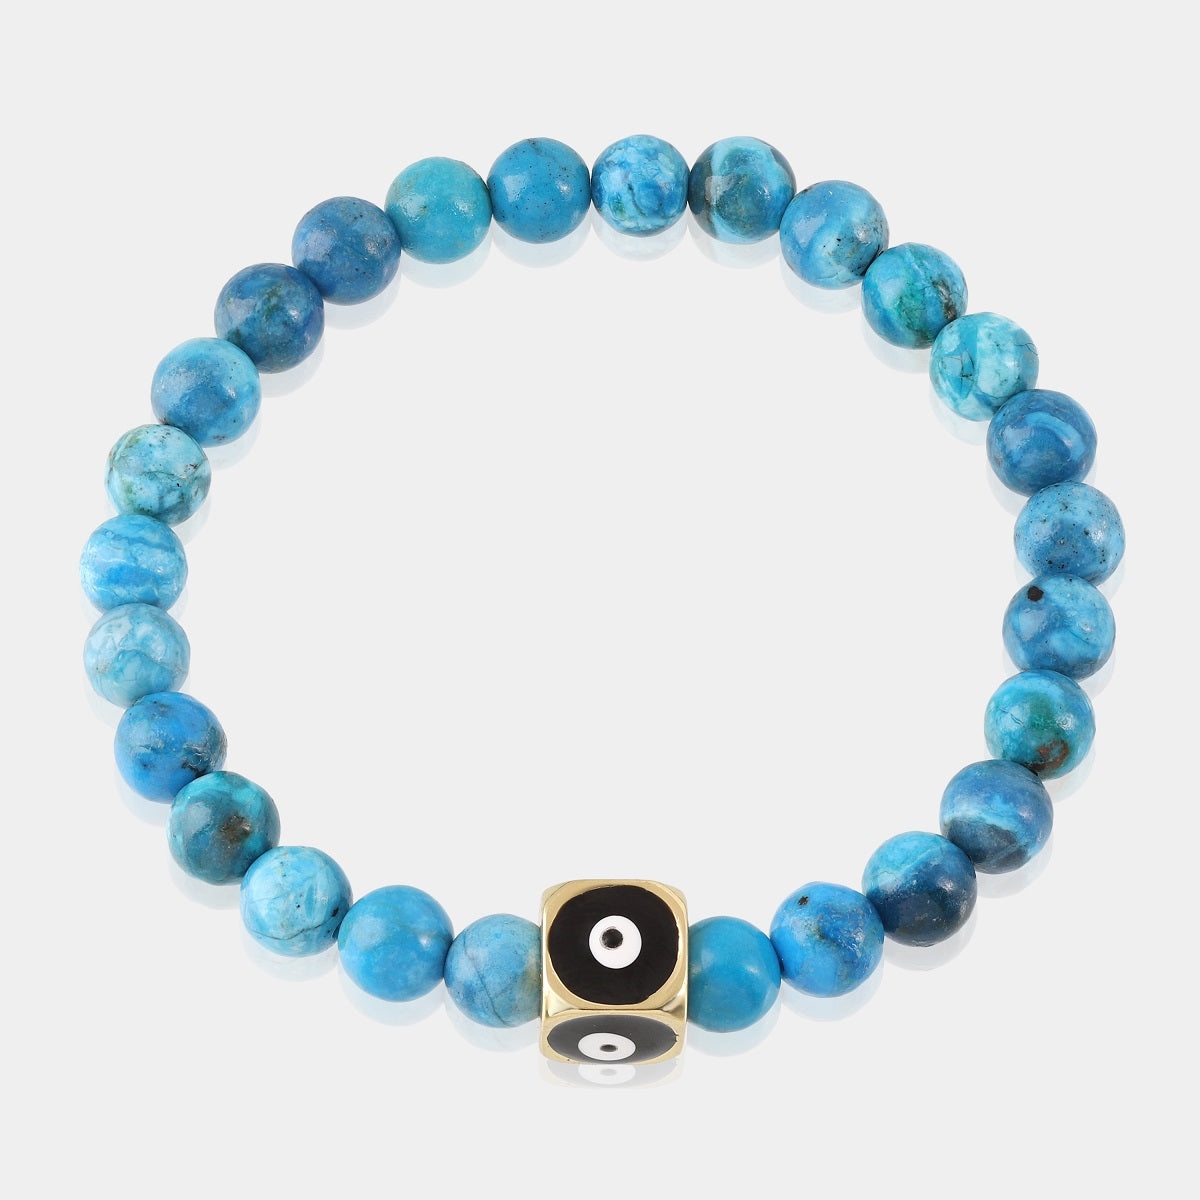 Smooth round beads in a soothing blue shade, radiating tranquility and fostering communication, adorning a stretch bracelet.